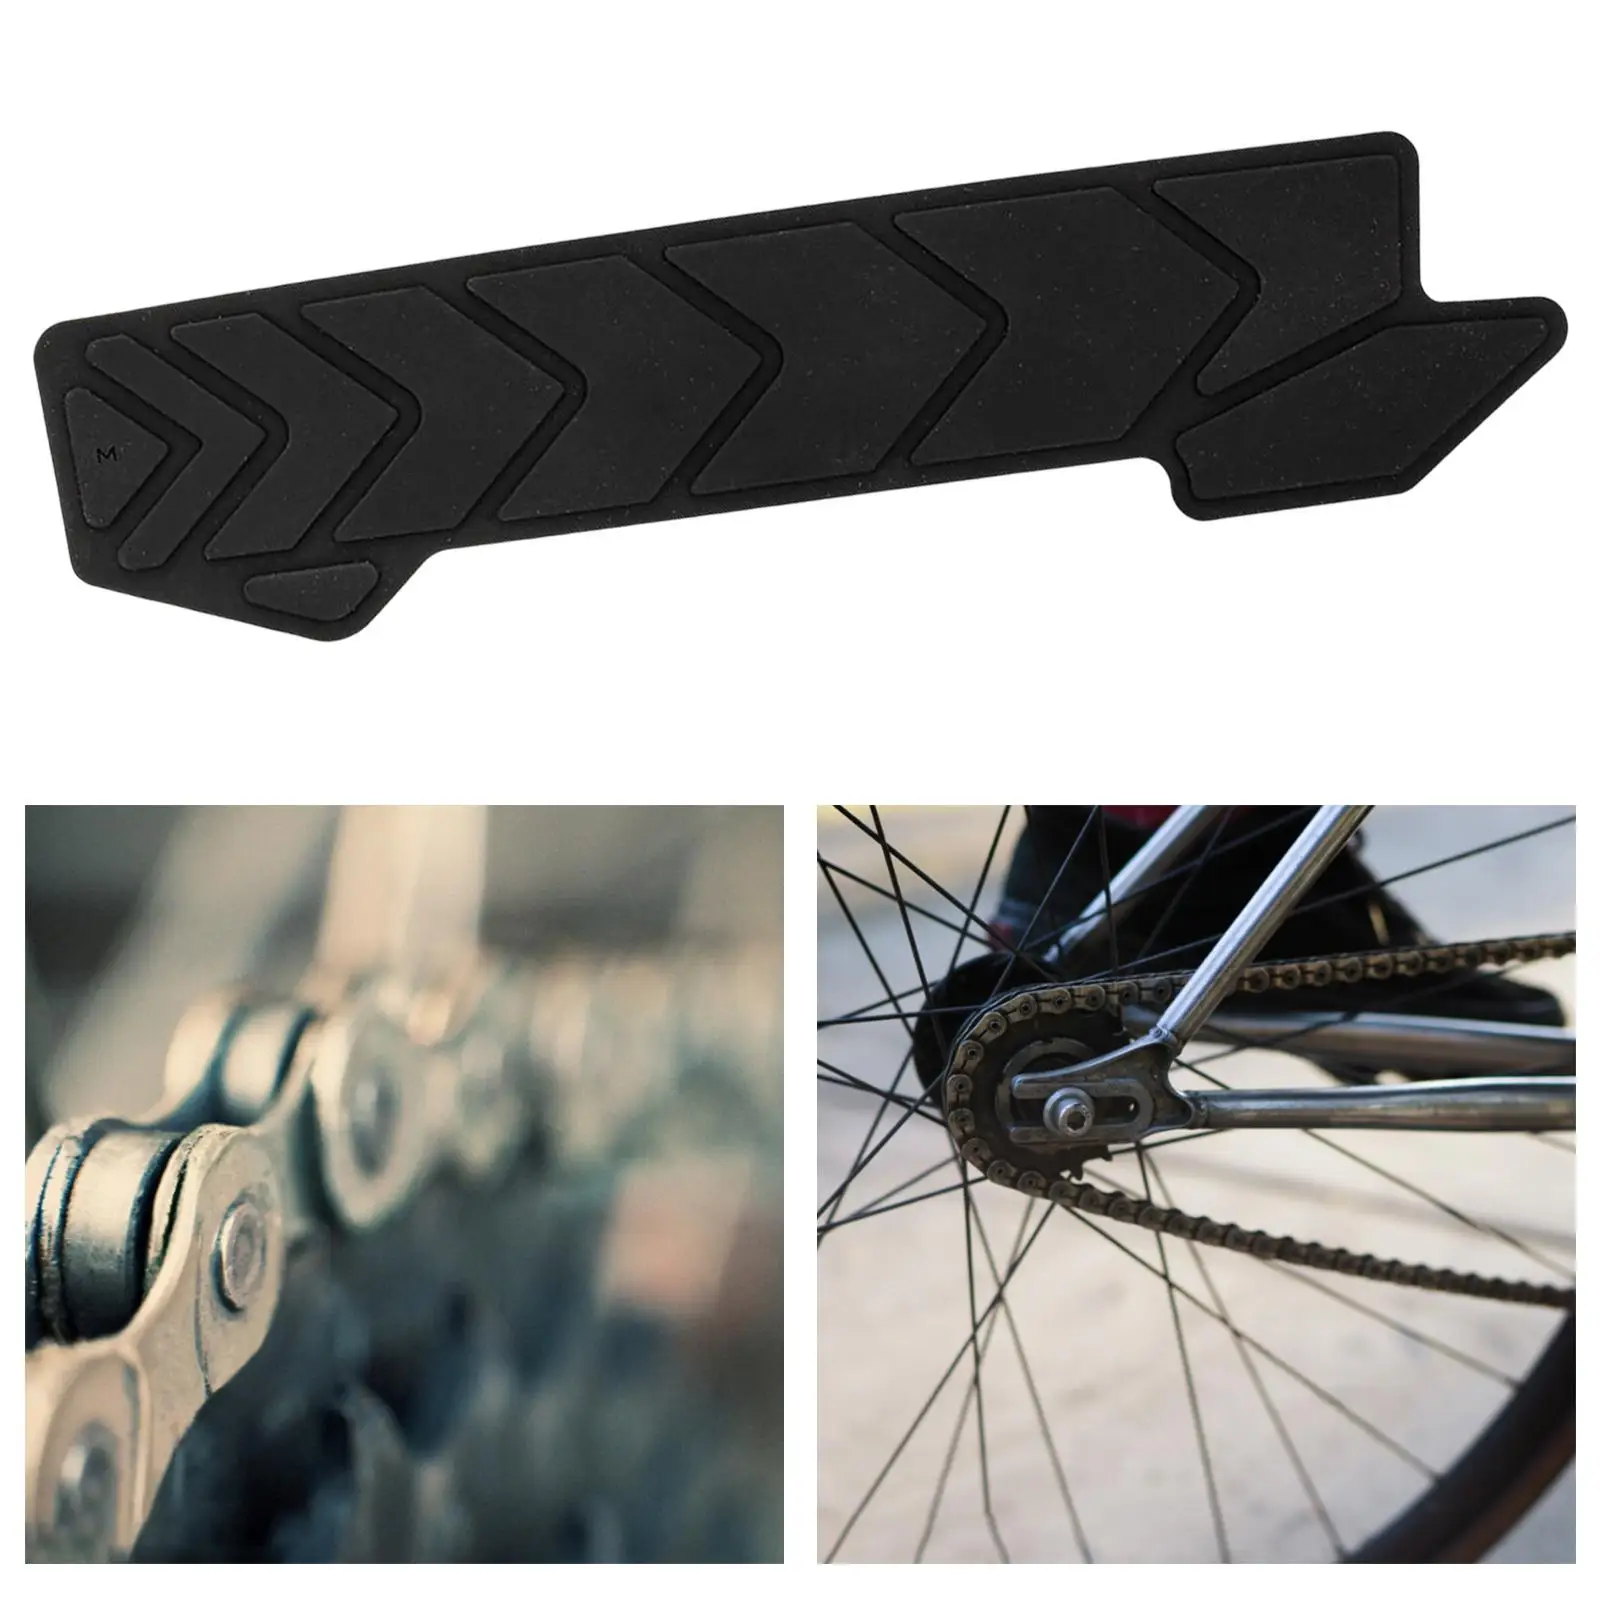 Bike Frame Chainstay Protector Guard Adhesive Frame Protection Protective Guard Chains Cover Decal for Bicycle Mountain Bike